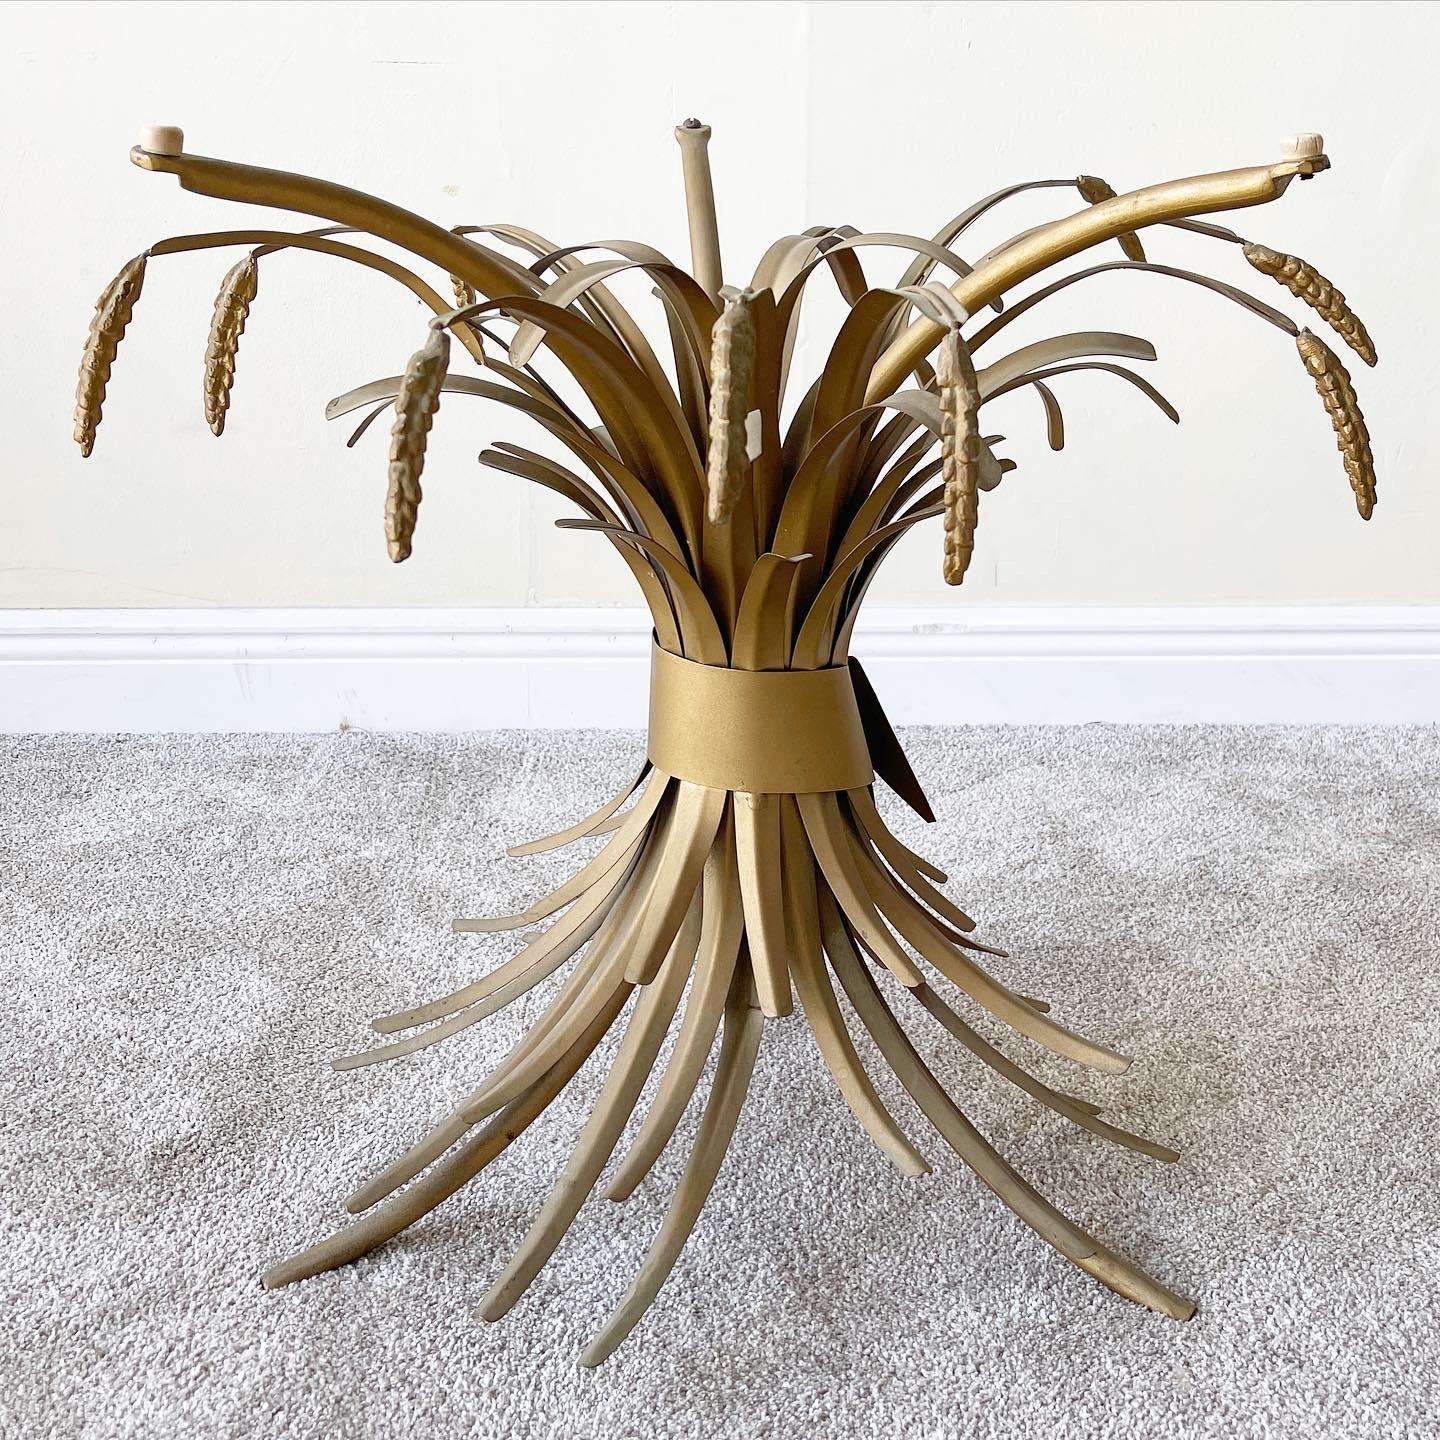 Mid 20th century sculptural gilt metal sheaf of wheat table with a round glass top. Styled after the famous Coco Chanel table this all original vintage table features a tall sheaf of gilt metal wheat with tips of wheat exploding from the base upward